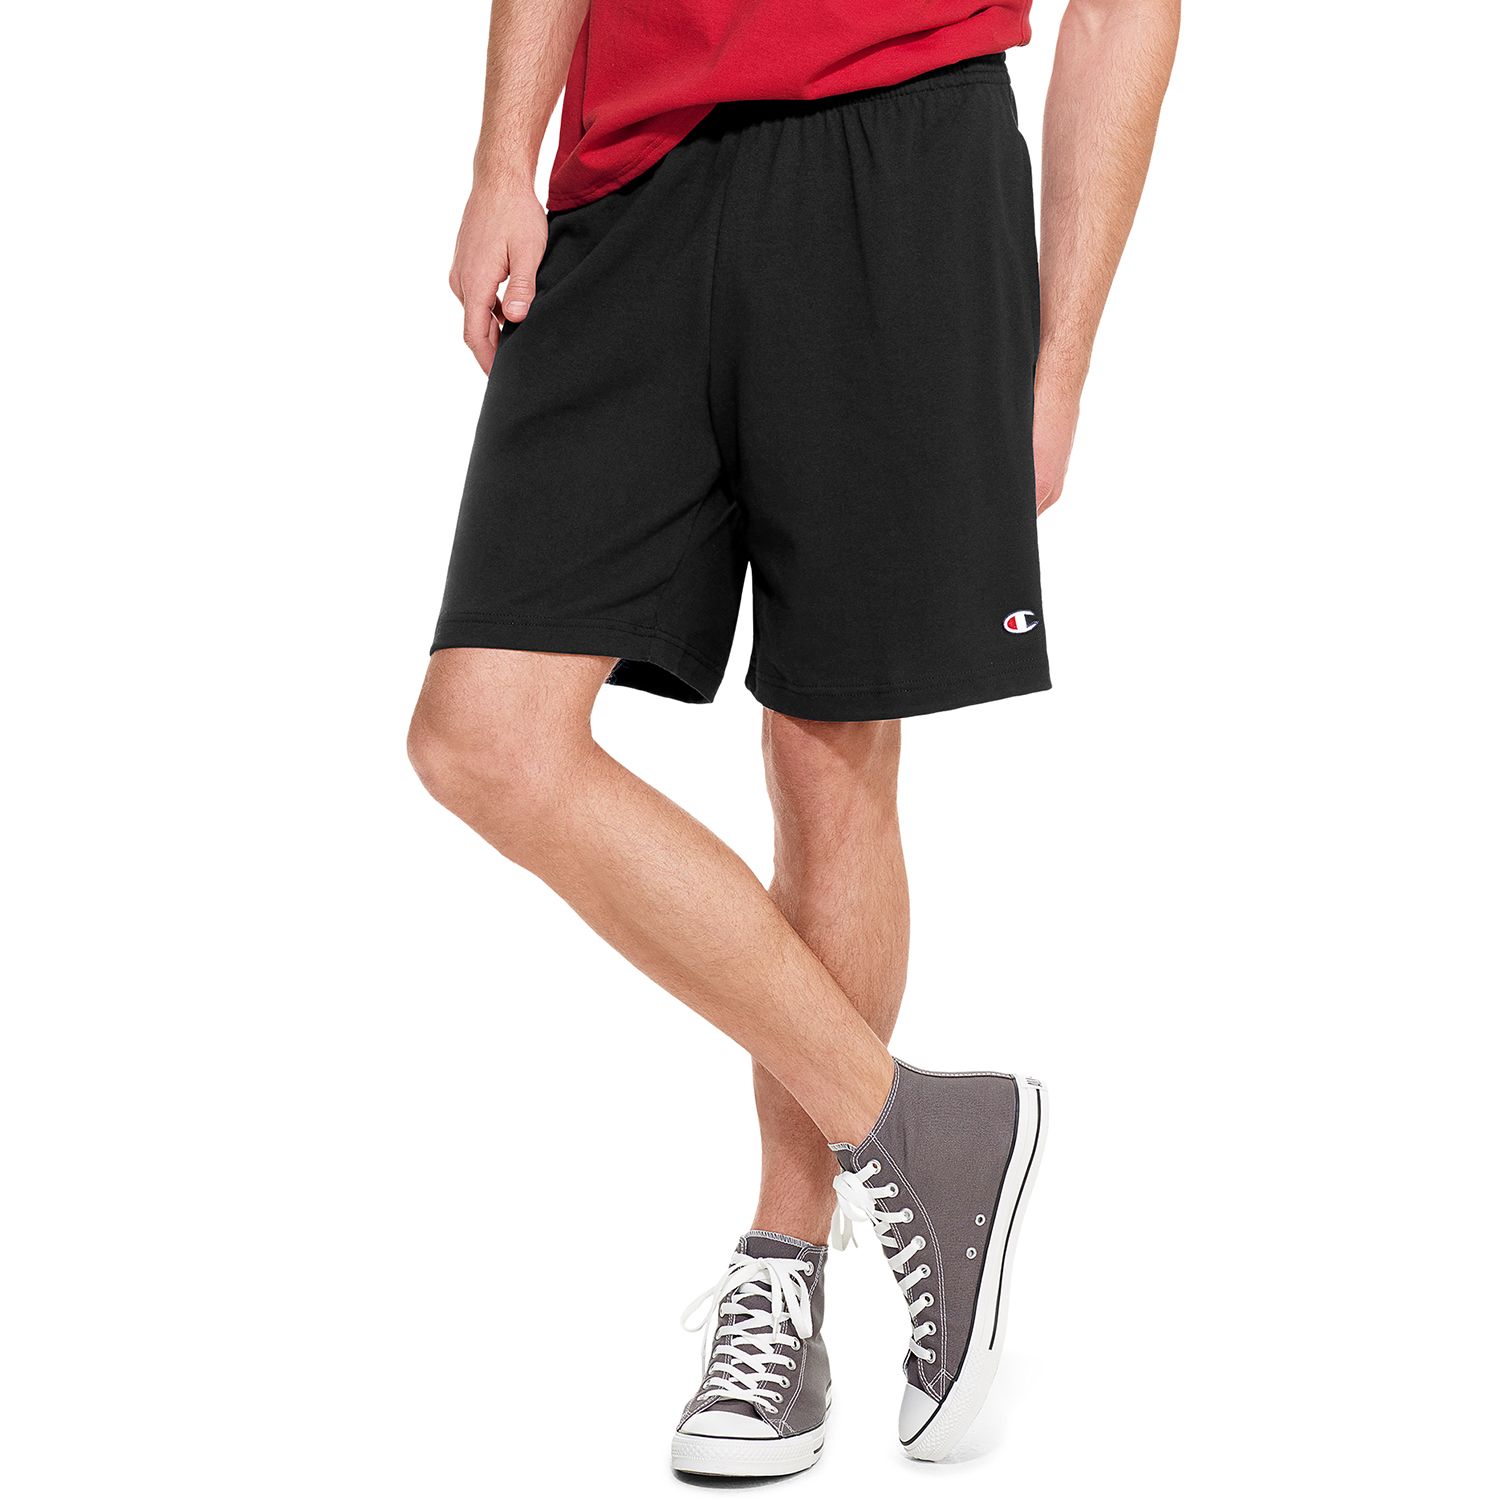 Men's Champion Rugby Shorts